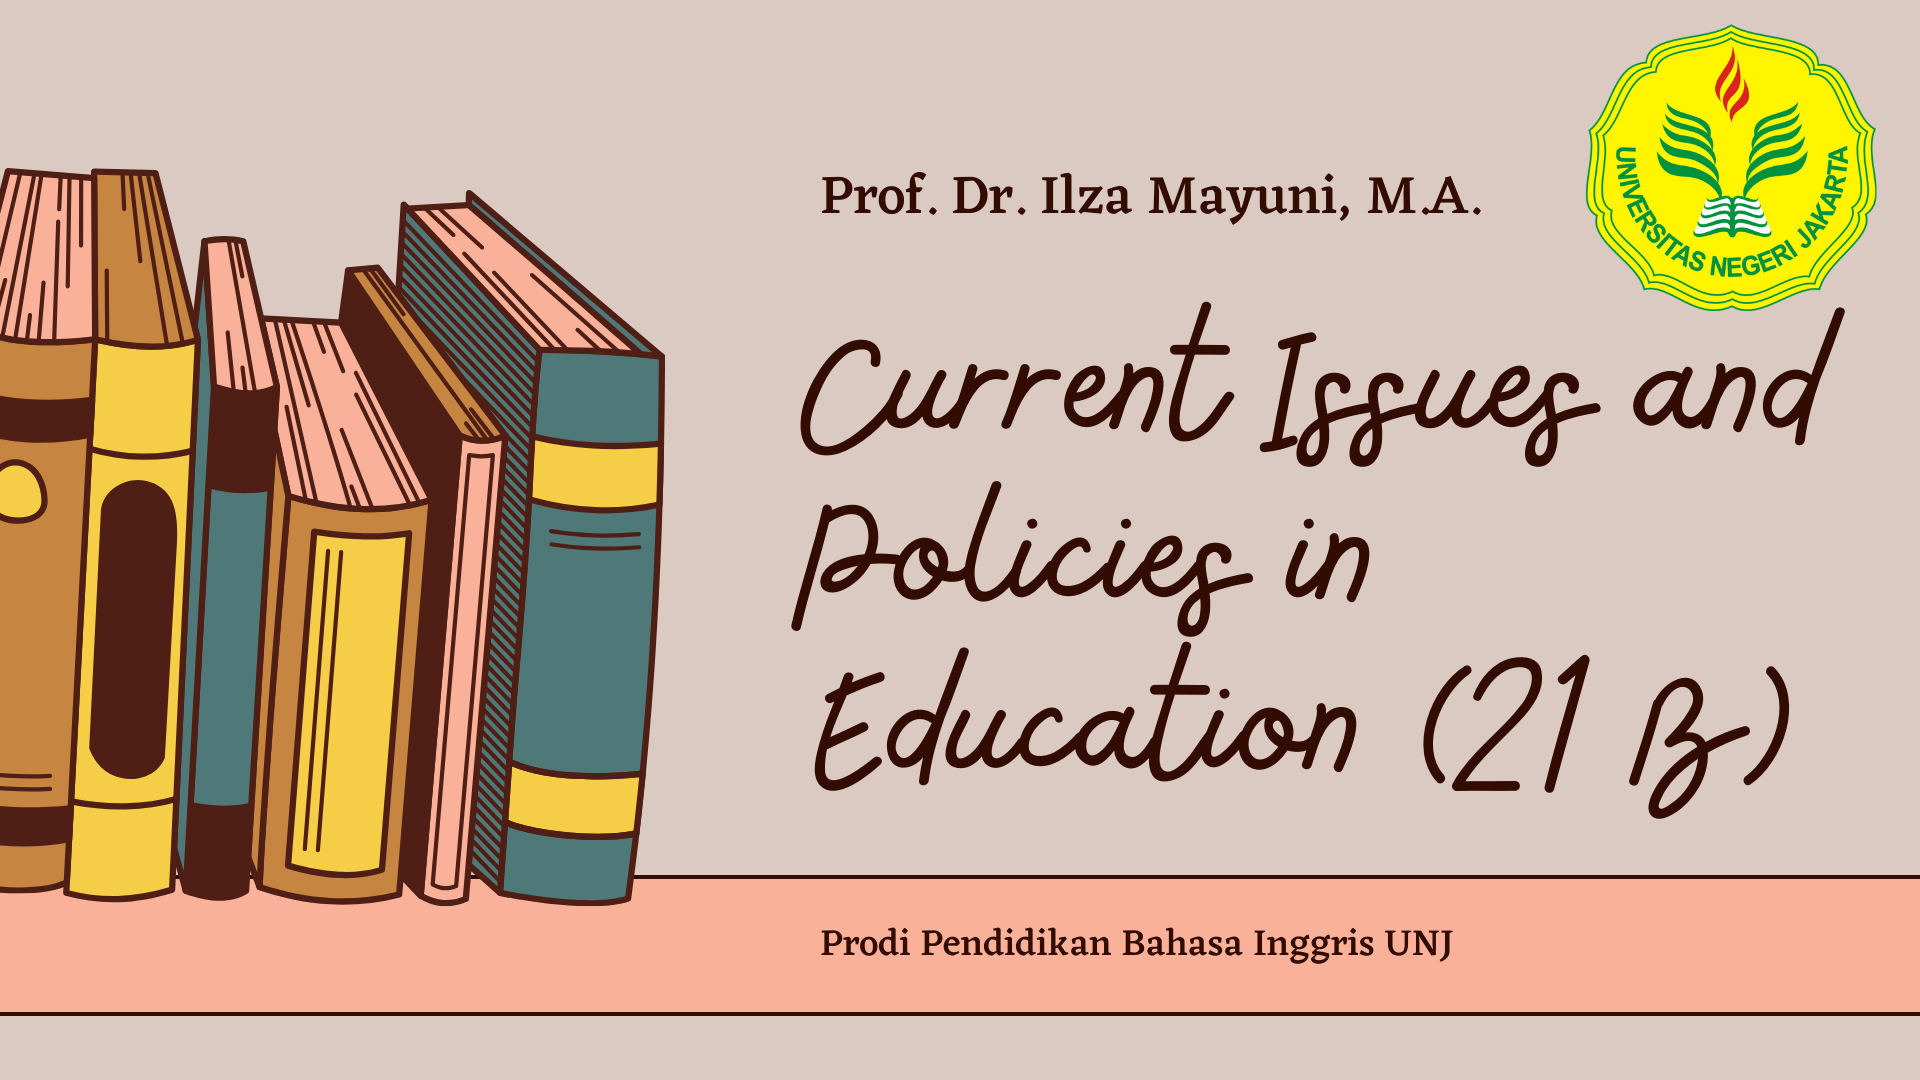 Current Issues and Policies in Education (120-21 B)